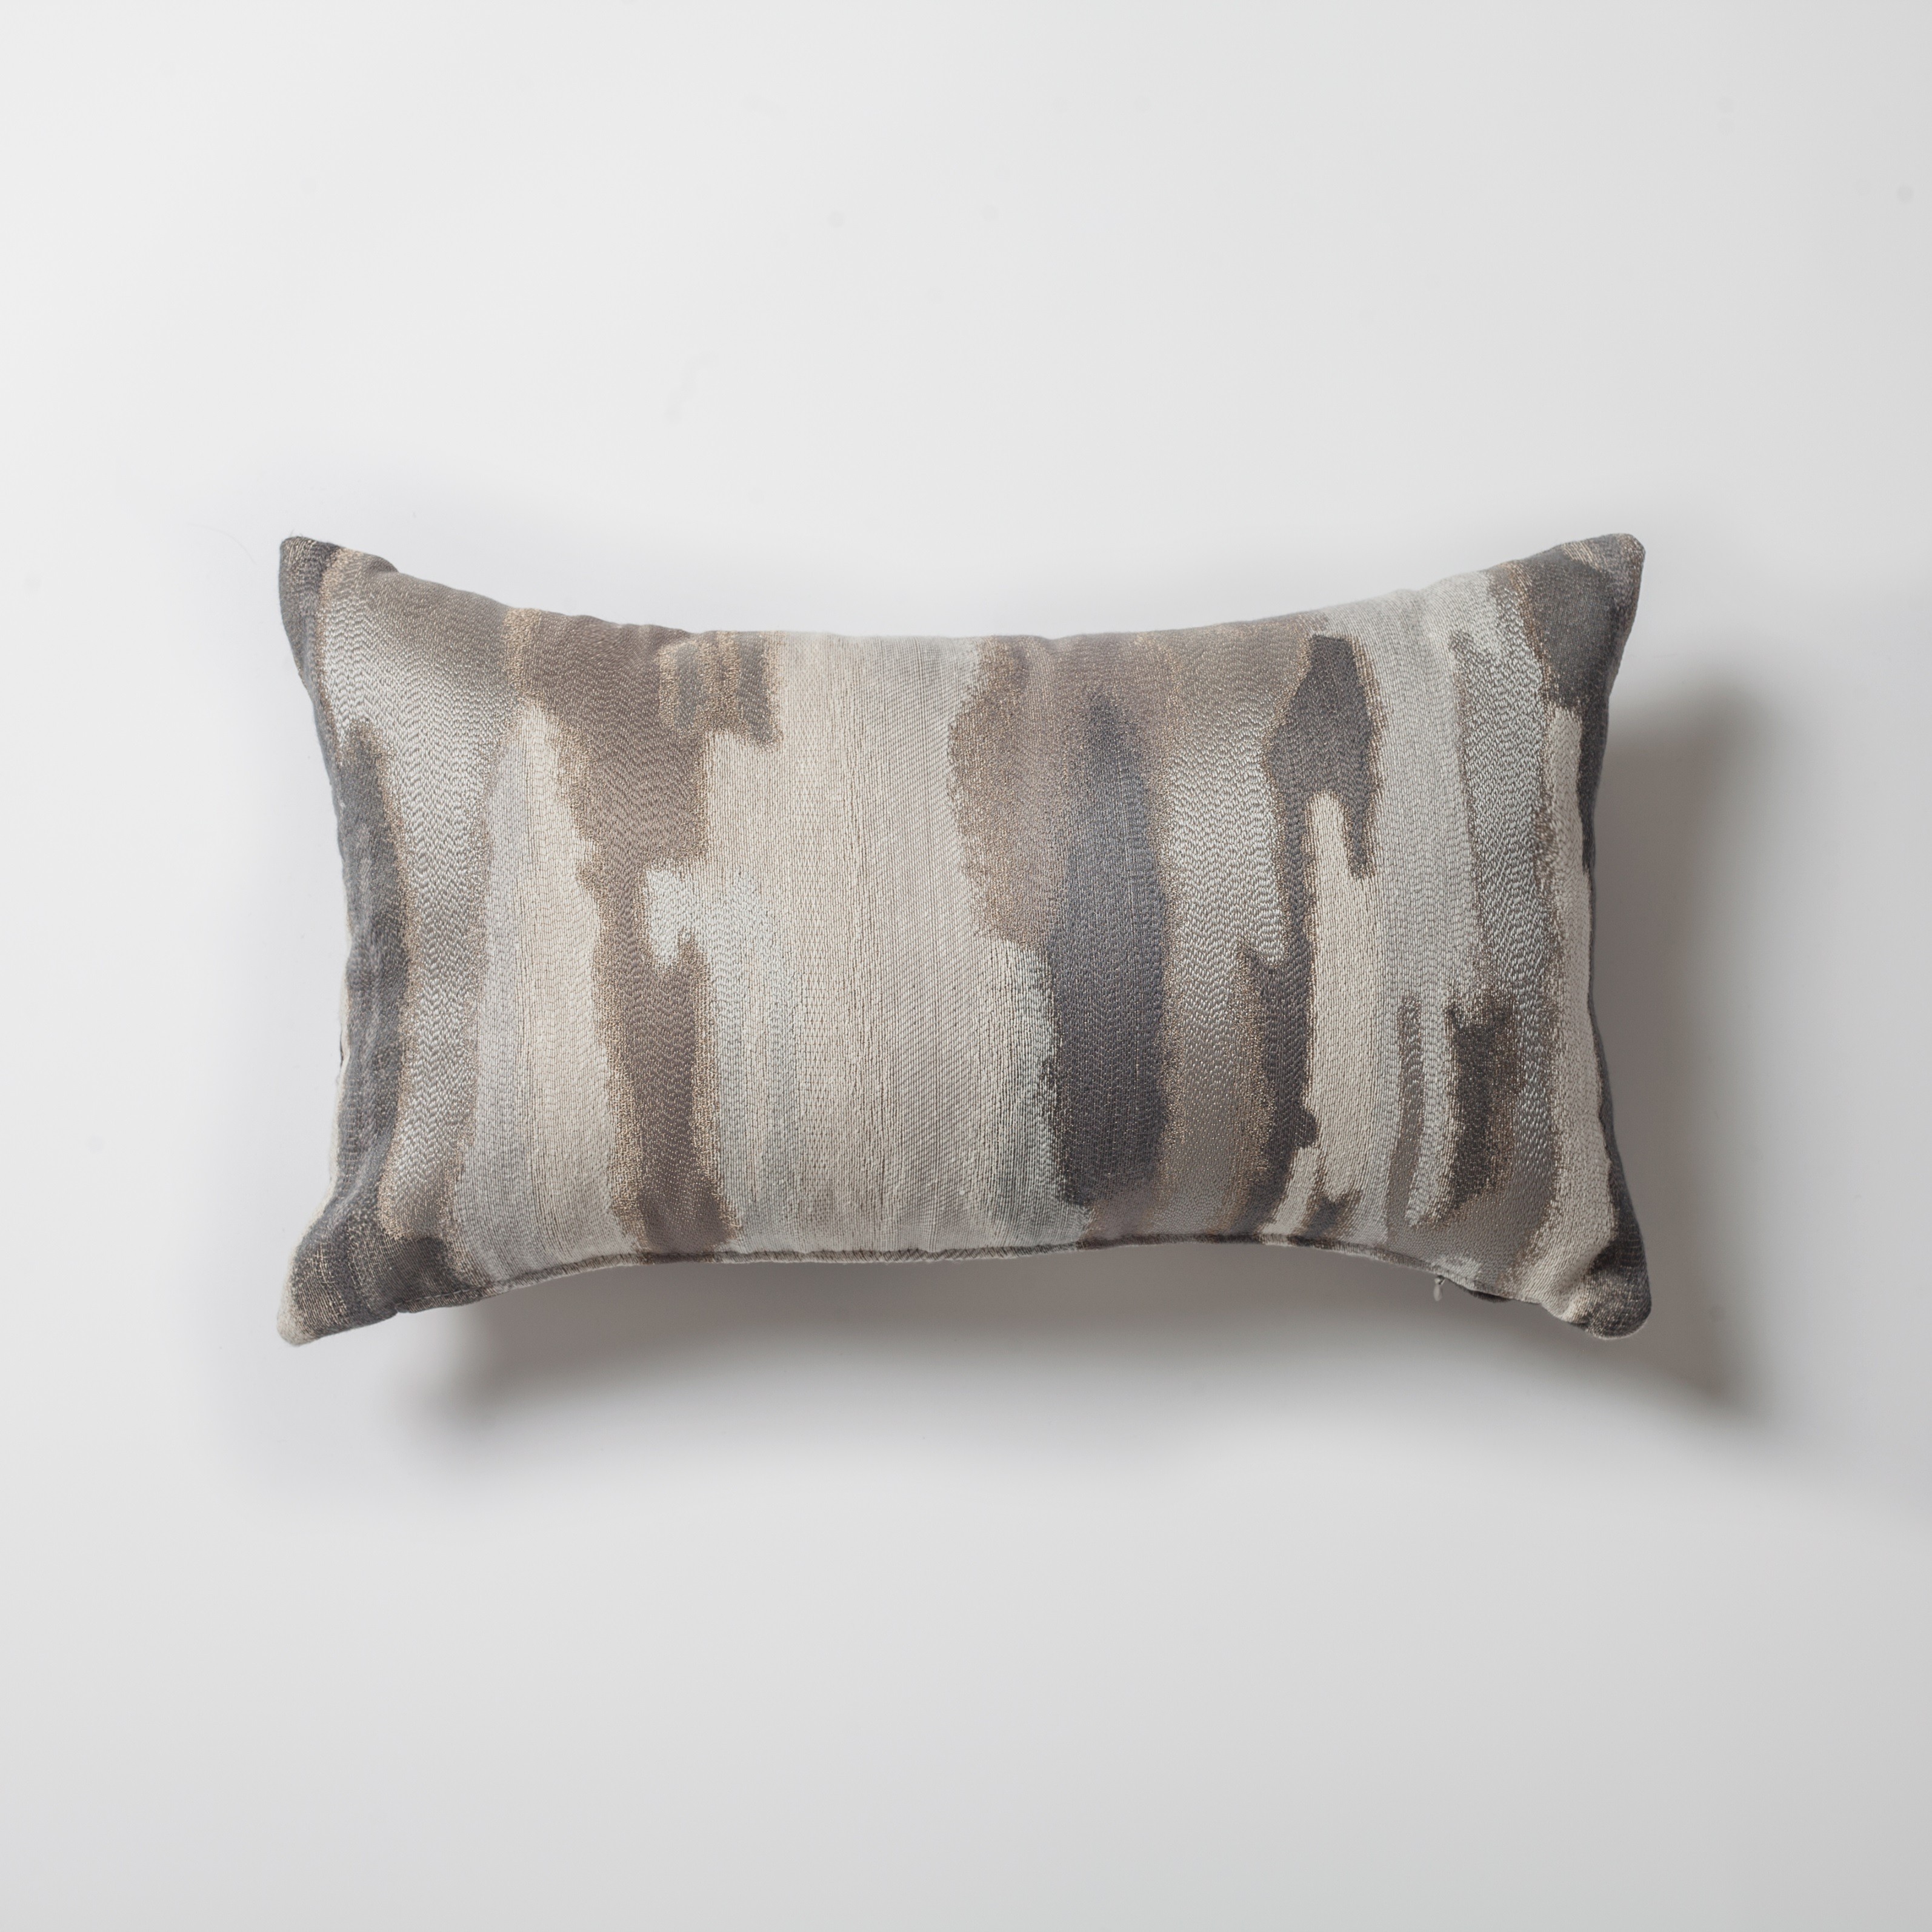 "Pastel" - Grey Vison Beige Watercolor Effect Patterned Pillow 12x20 Inch - Grey (Cover Only)